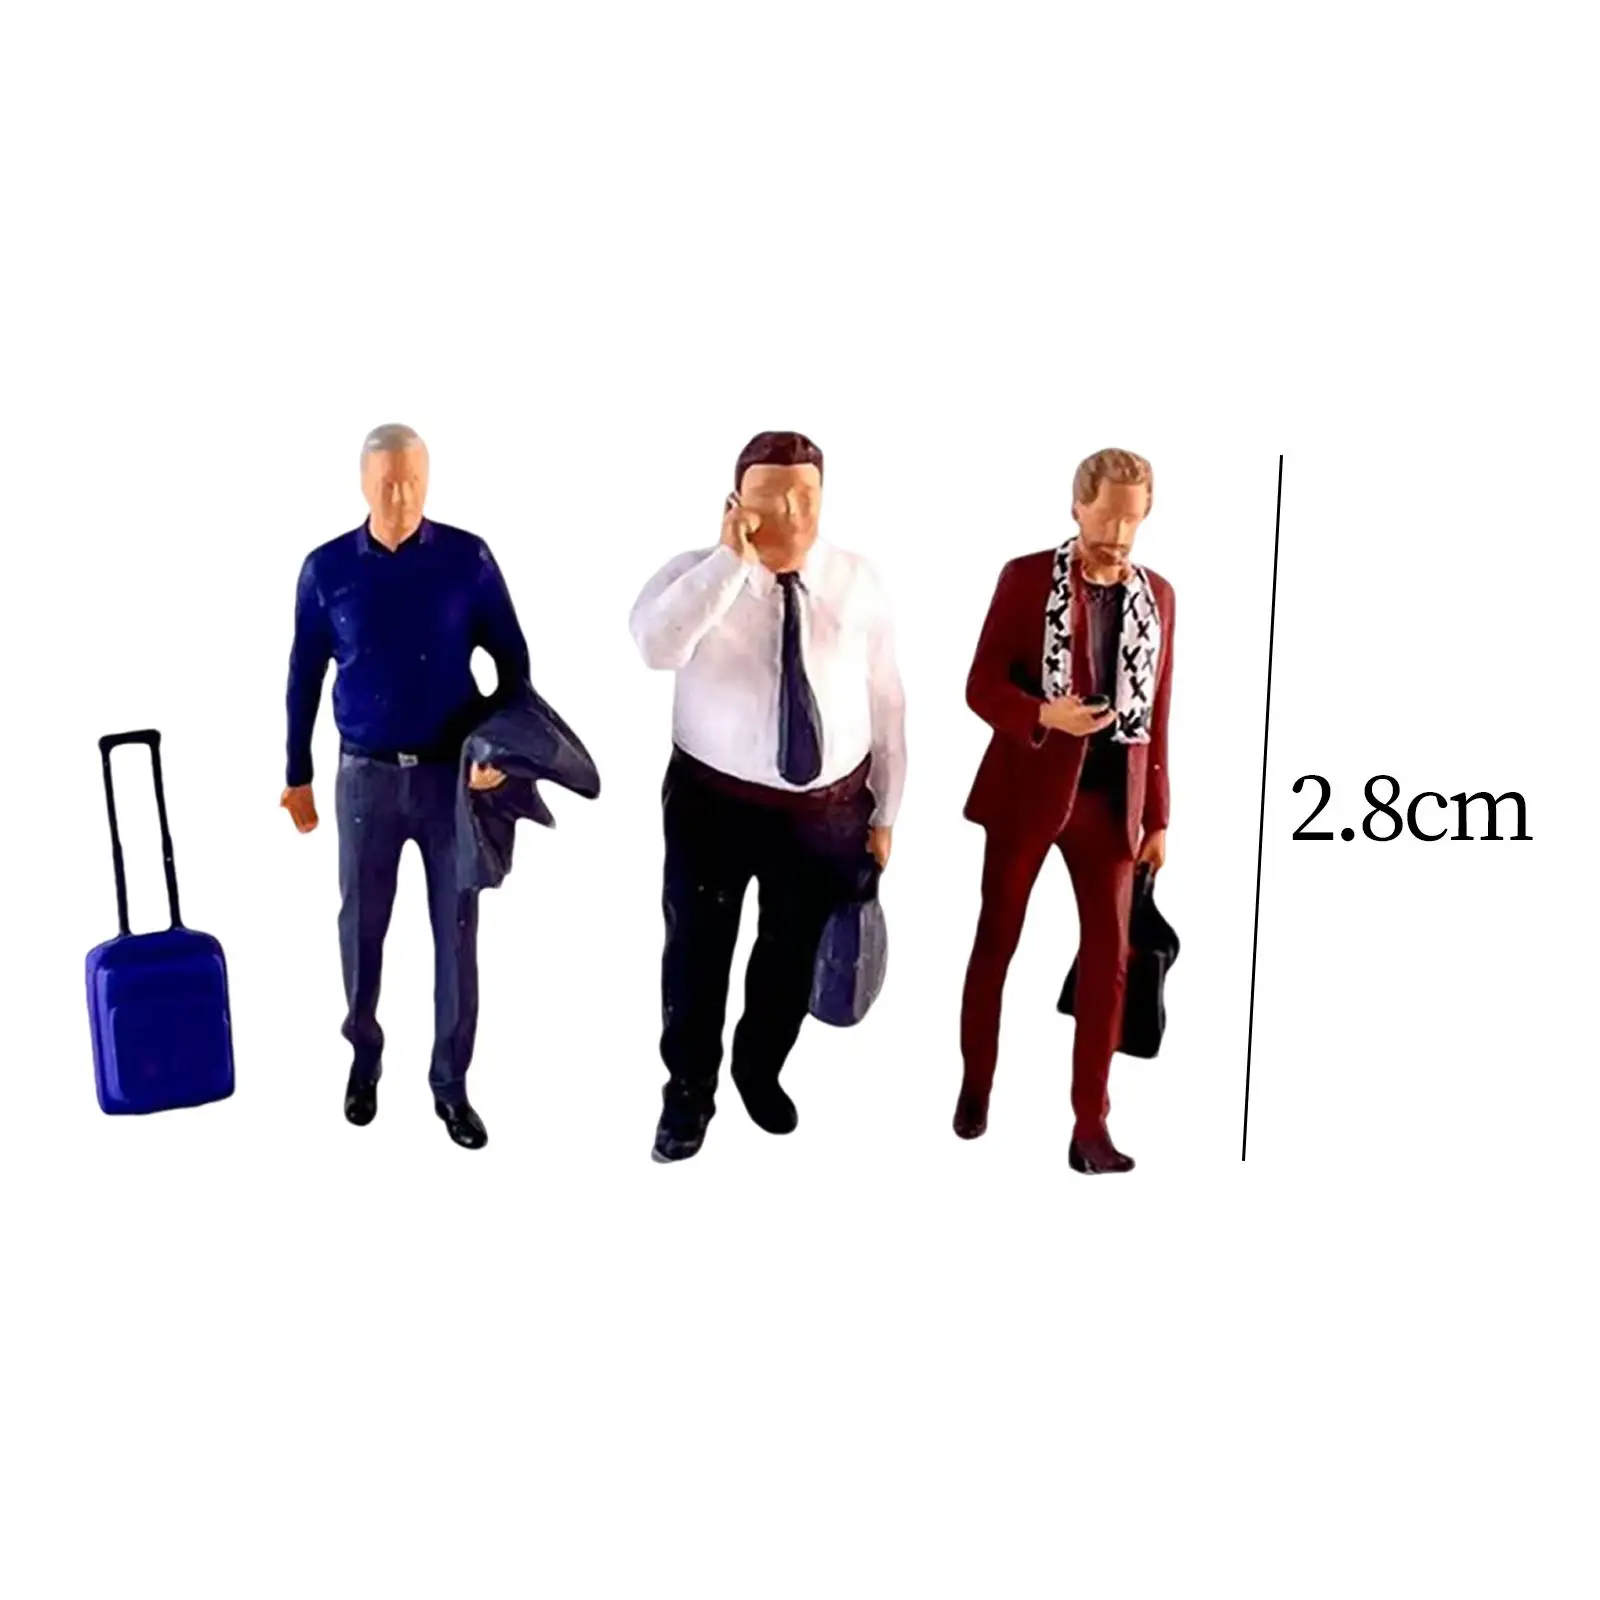 3 Pieces 1/64 People Model Pretend Play Toy Hand Painted Collectibles Desktop Ornament Diorama Scenery Miniature Diorama Figures